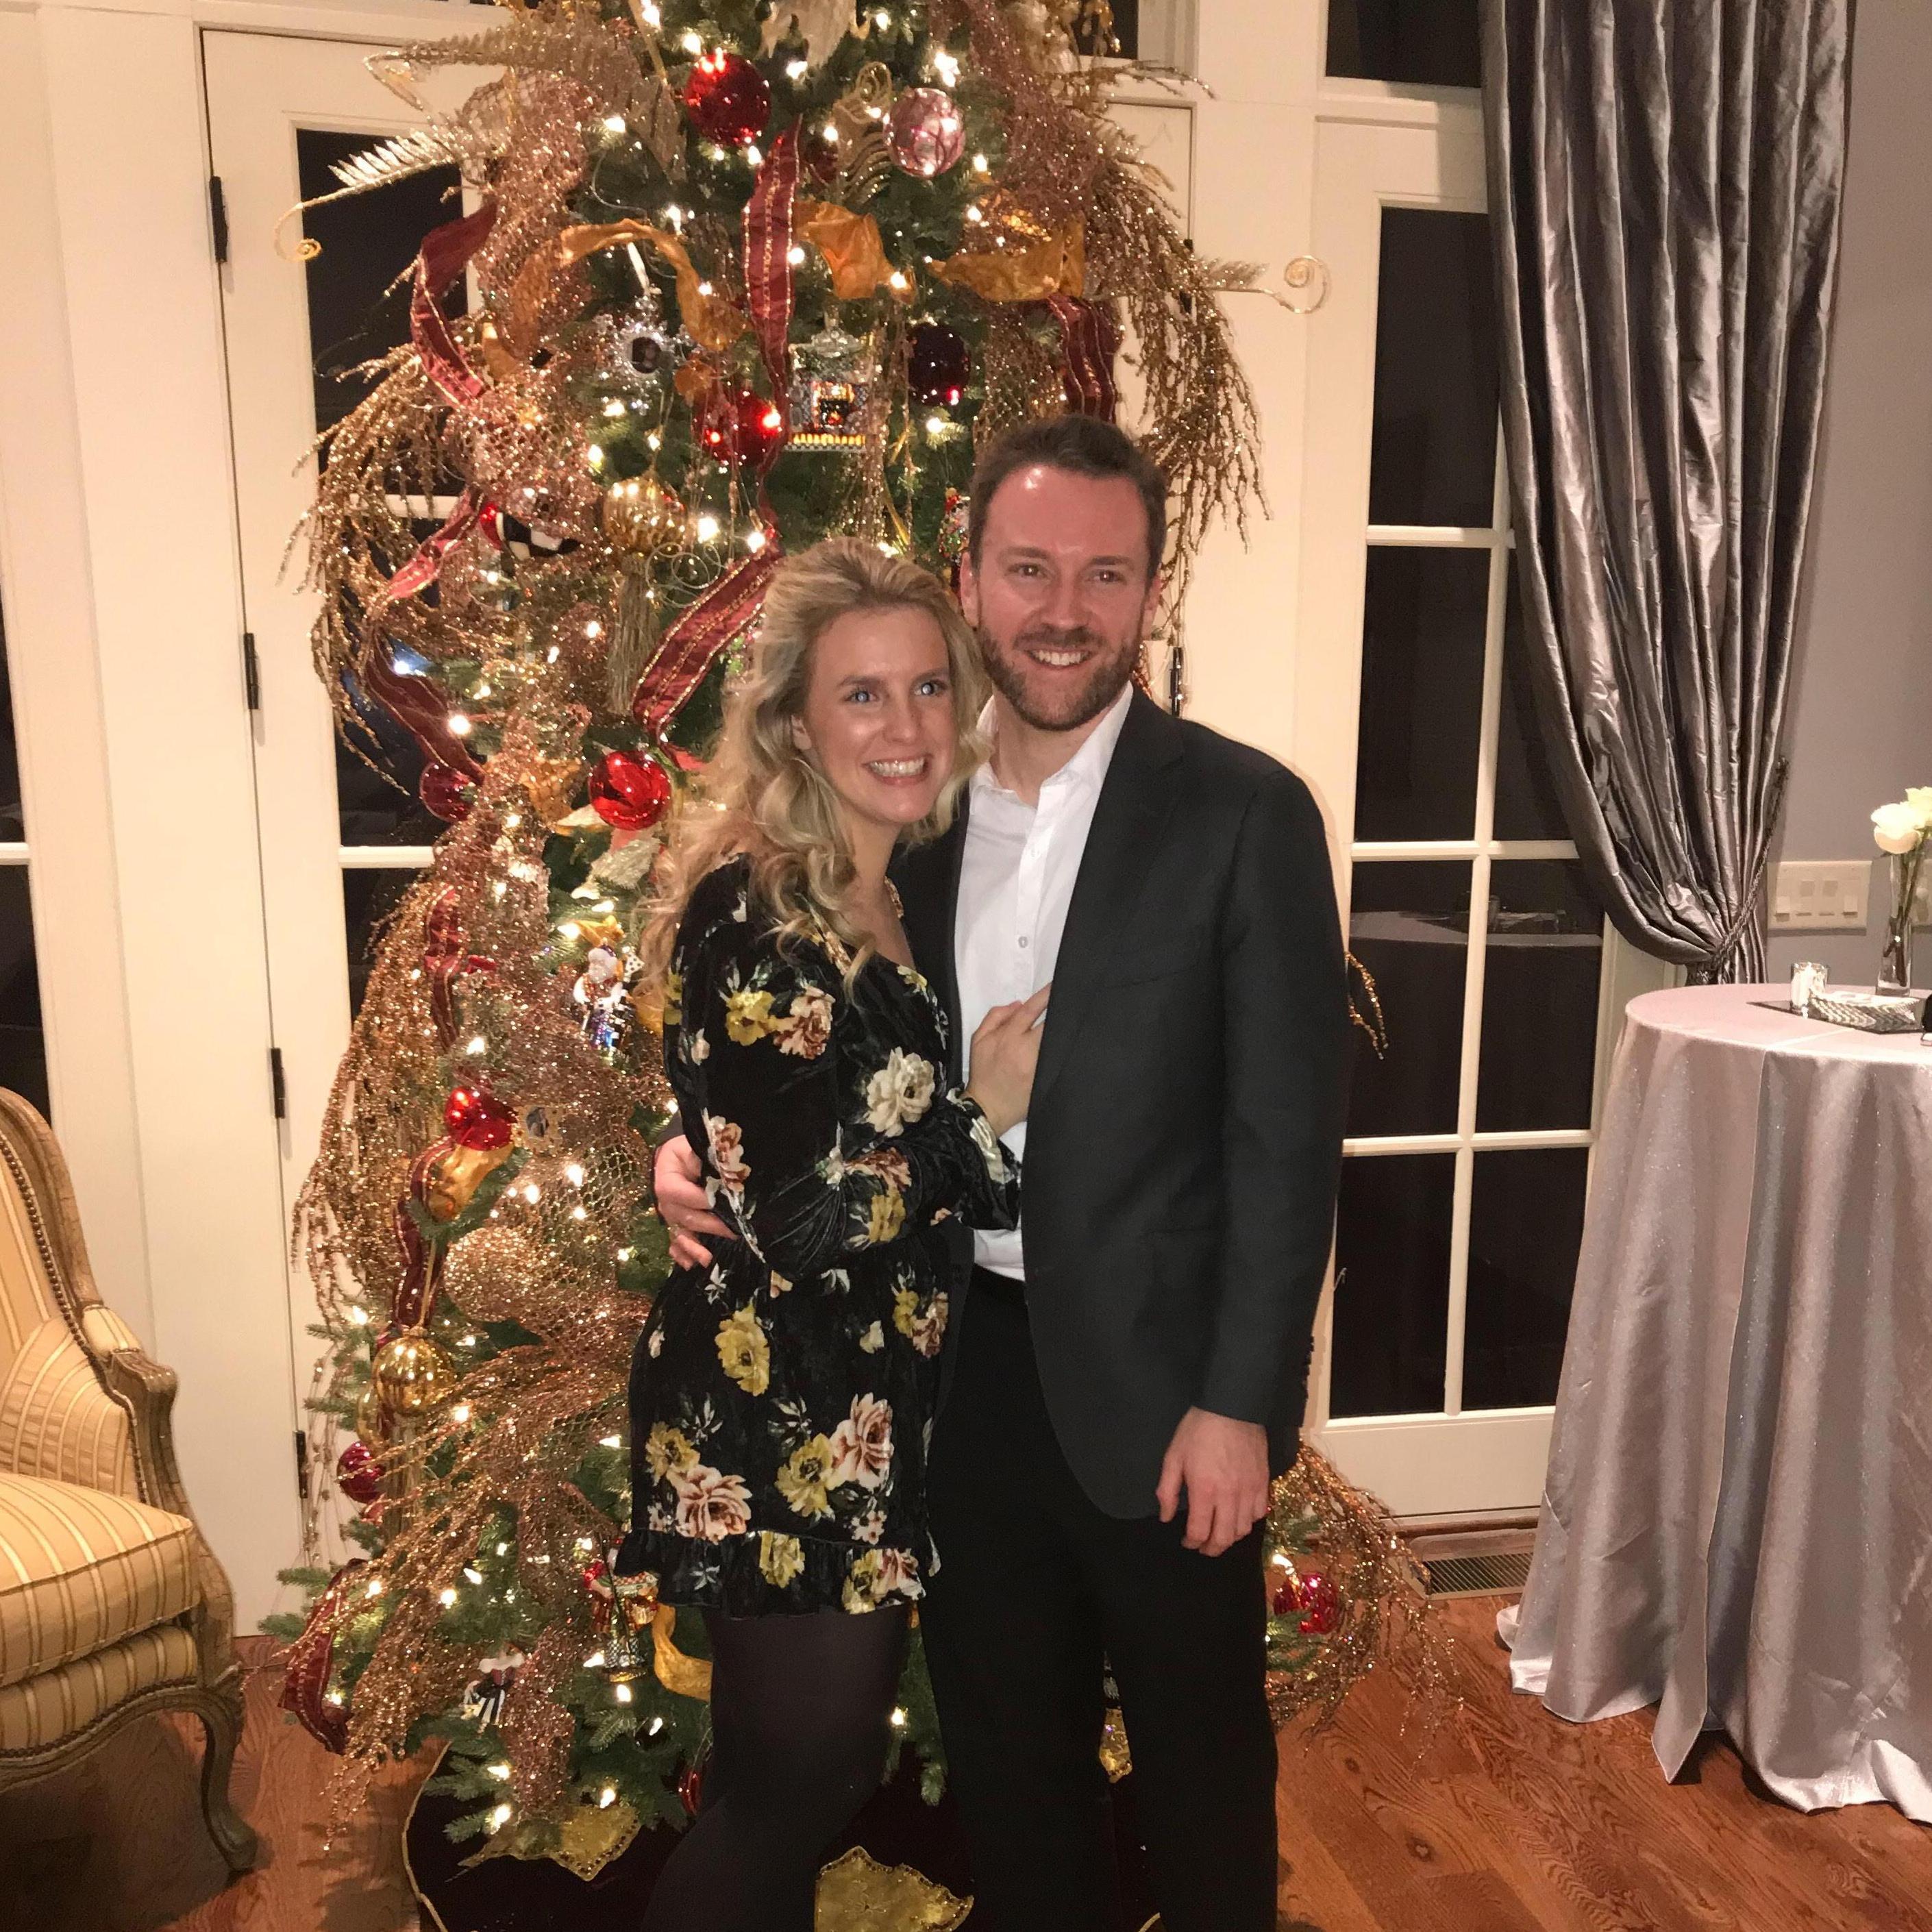 Our first Christmas together in 2018!